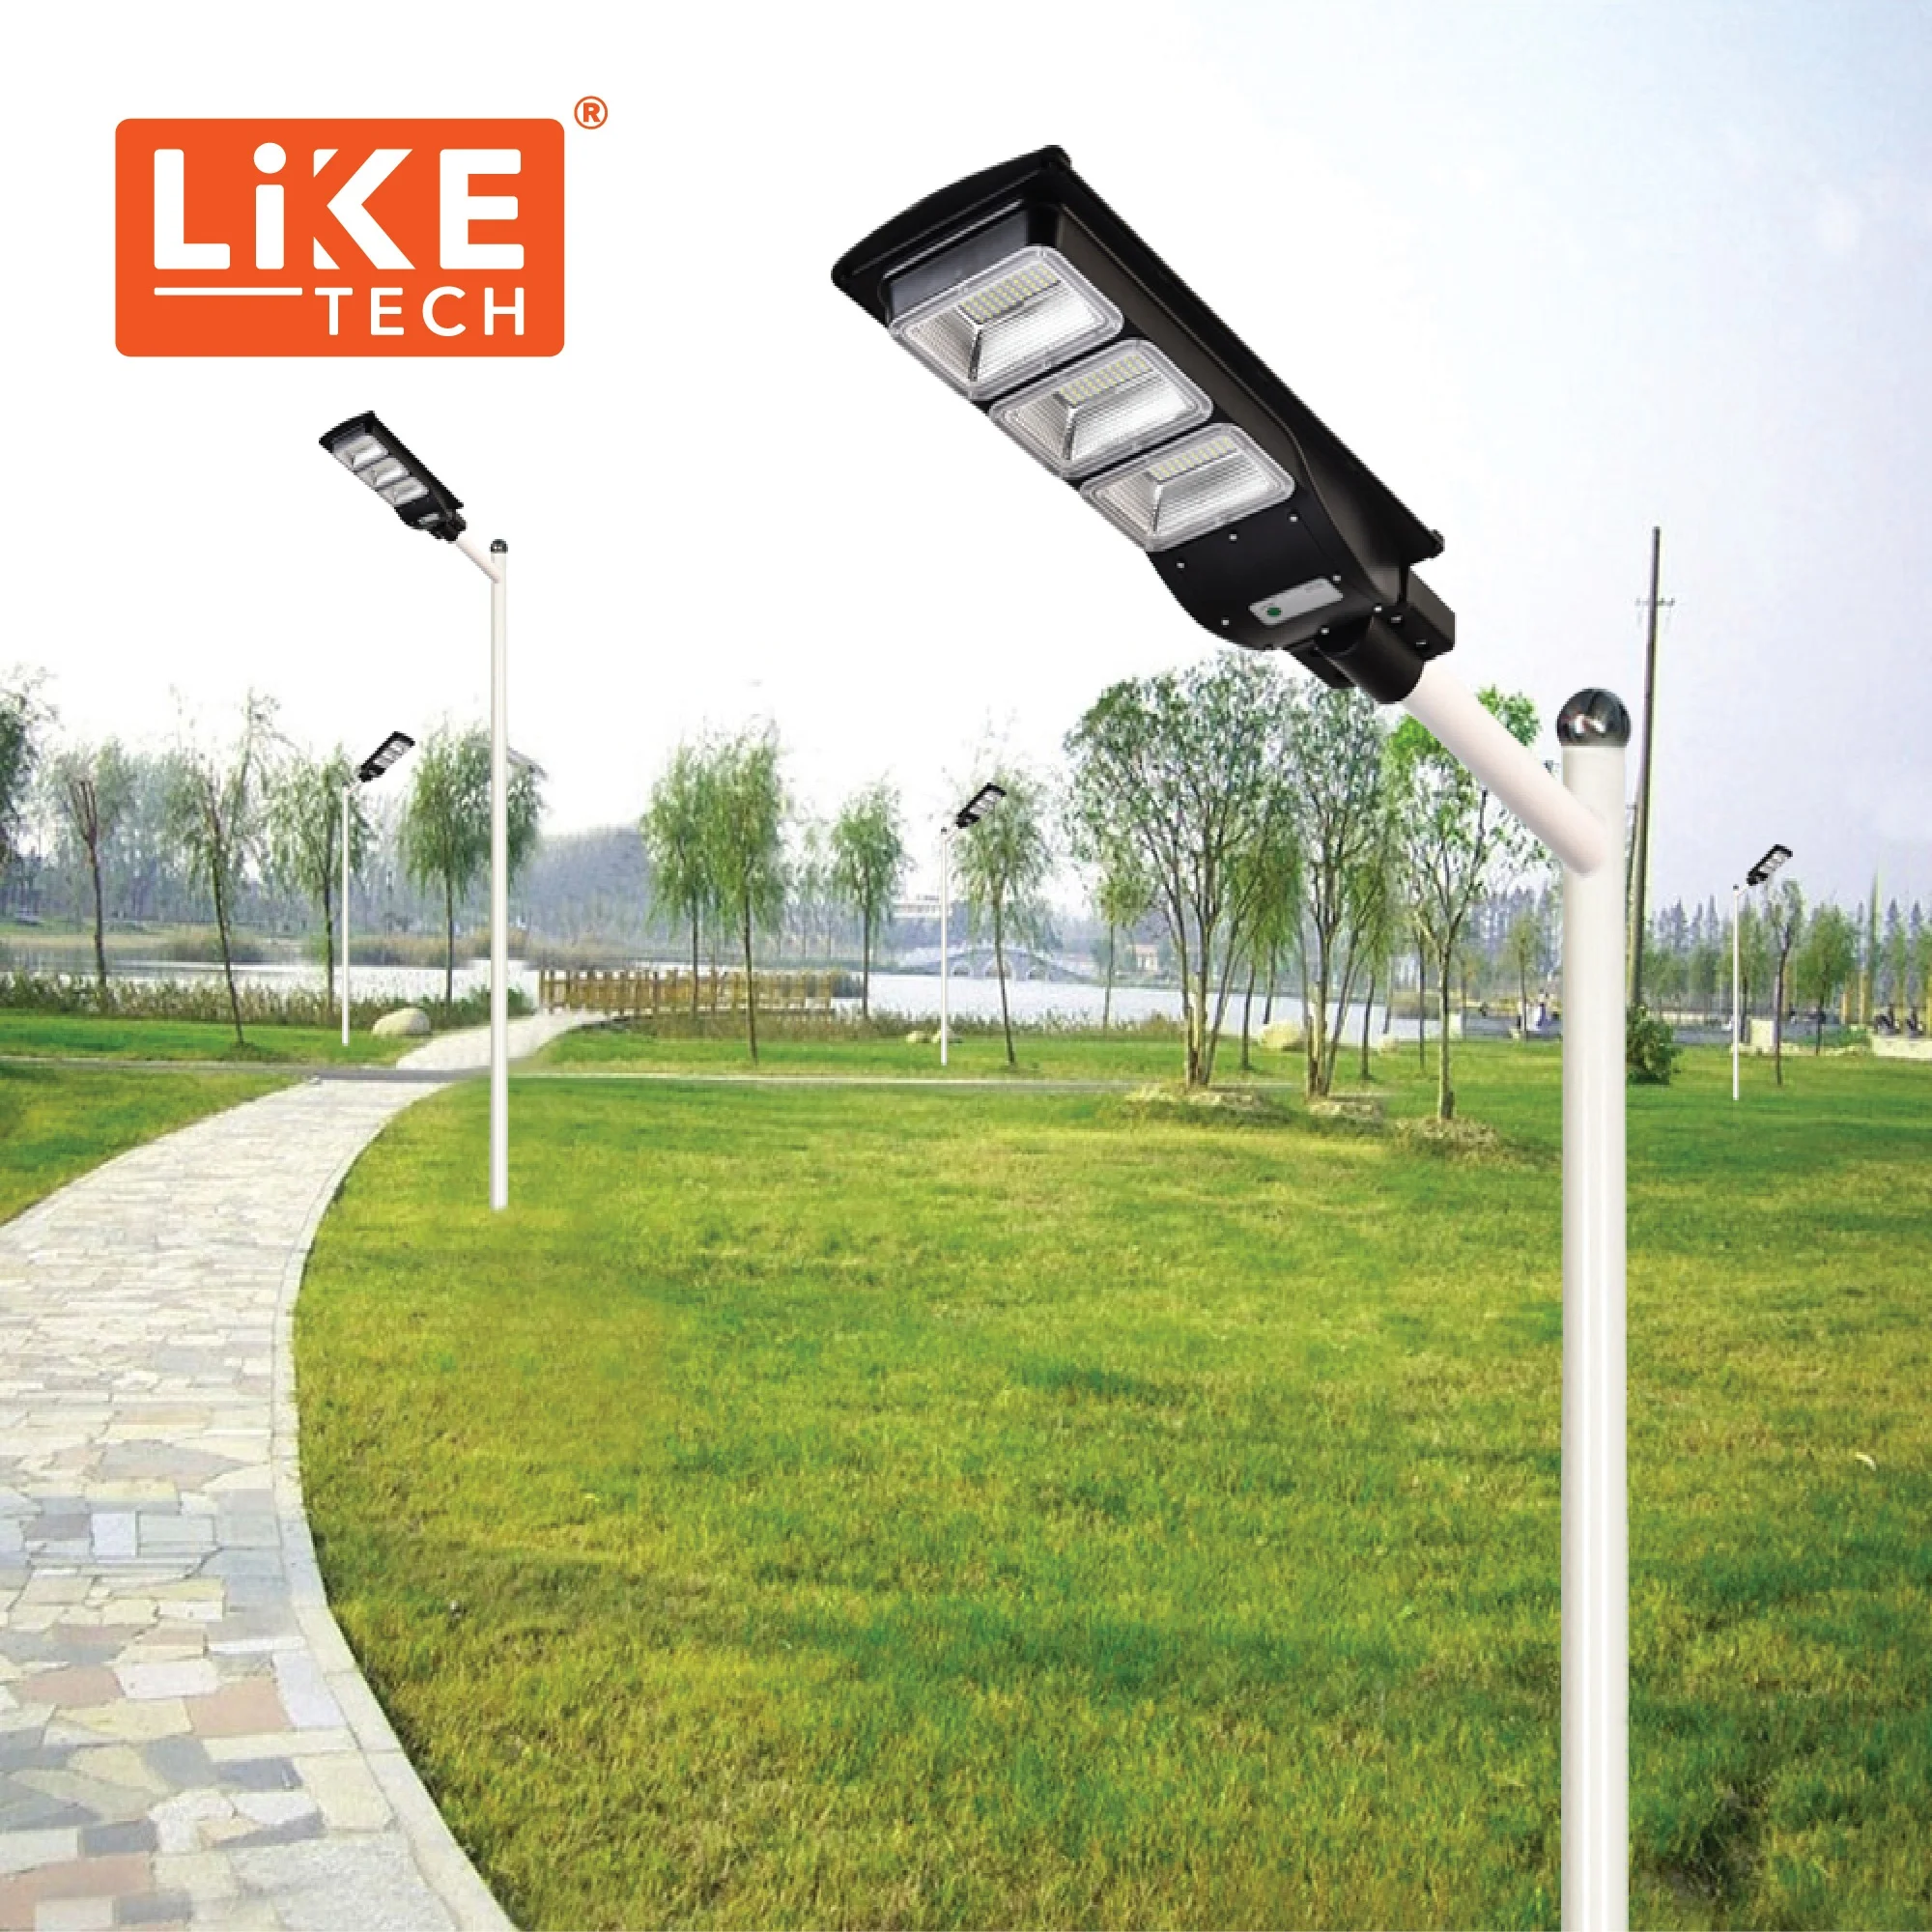 LikeTech Led Street Light New model extremely competitive high quality outdoor lighting Axe90W